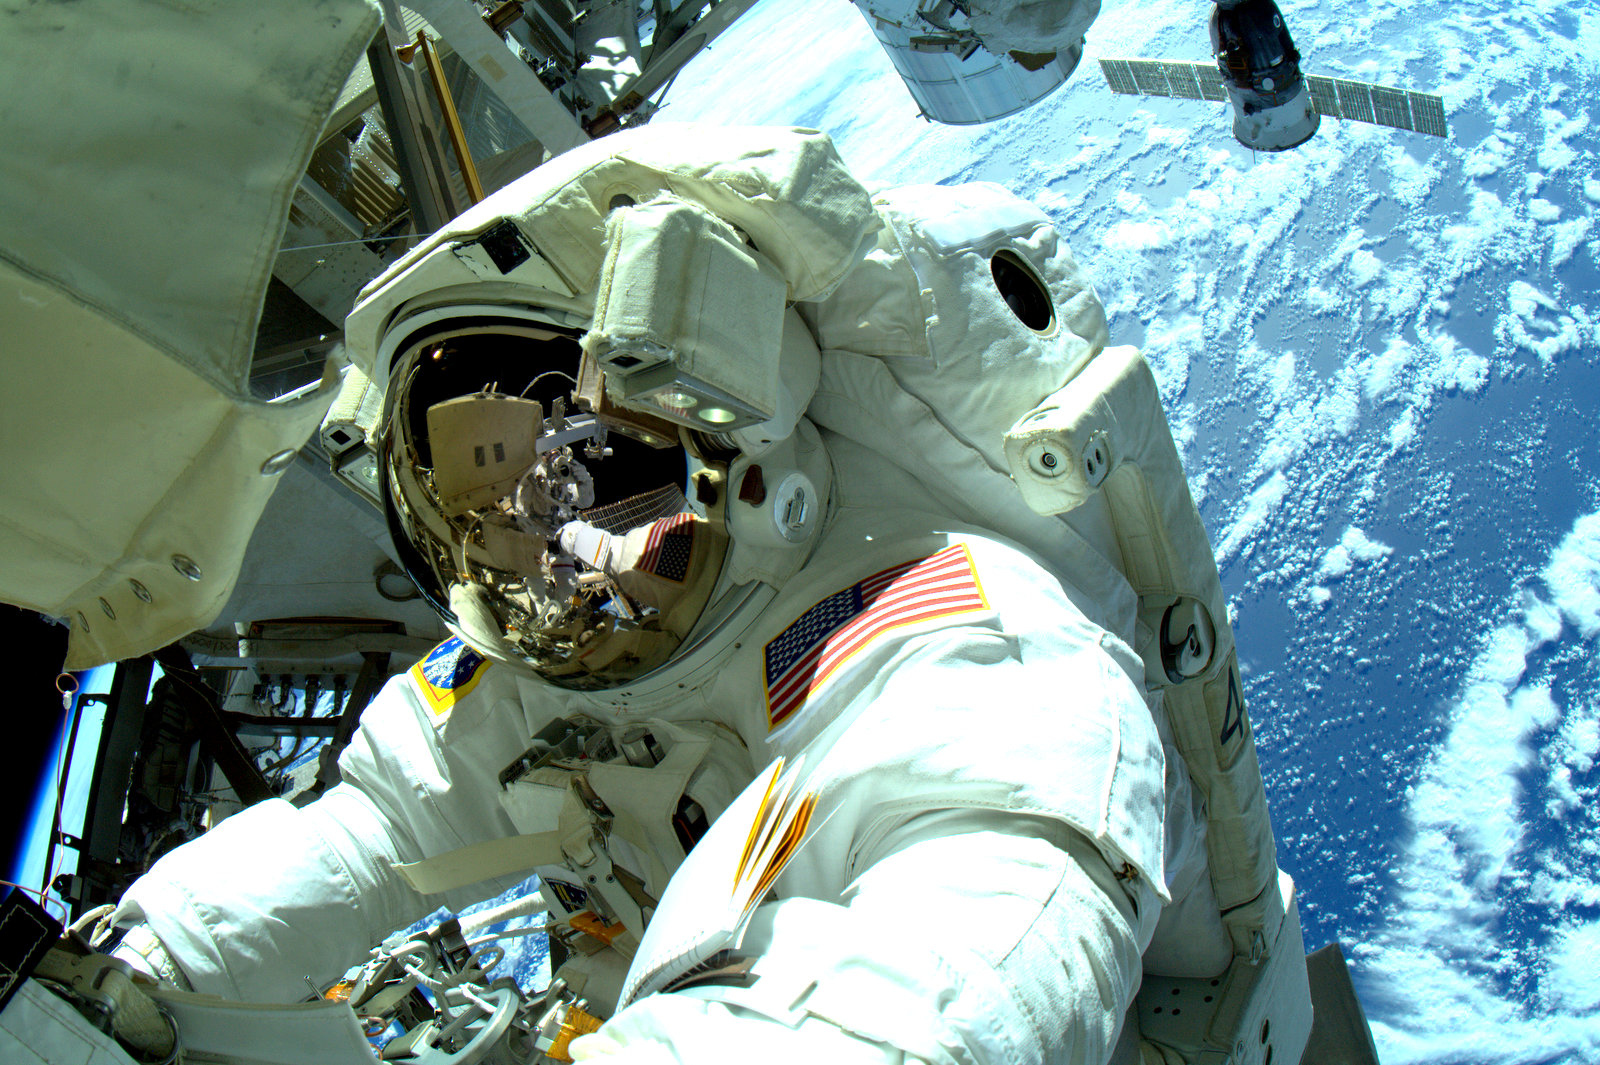 An astronaut outside the International Space Station (ISS)